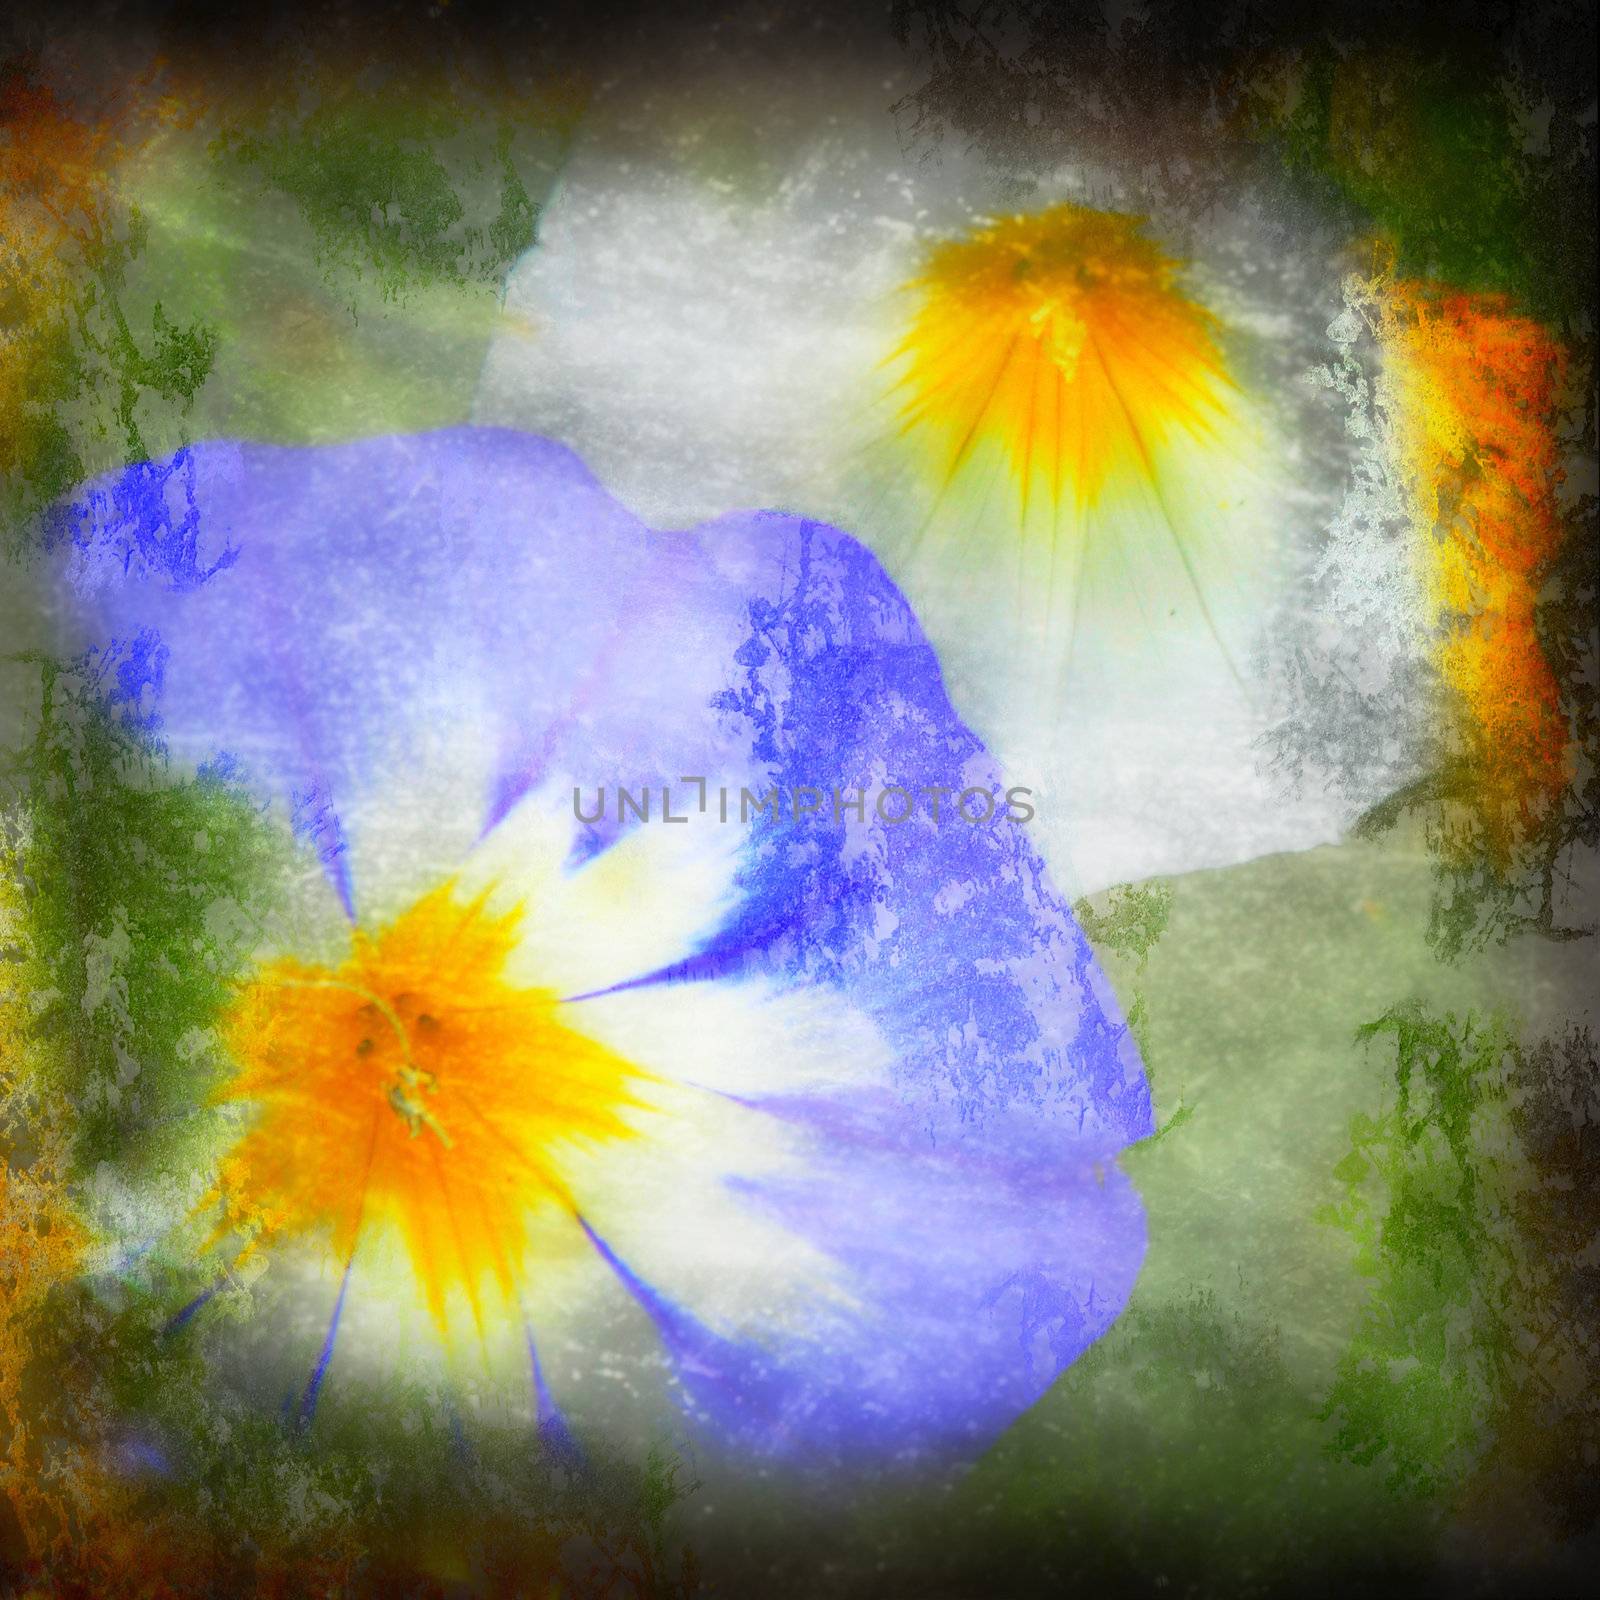 textured grunge background with two bellflowers